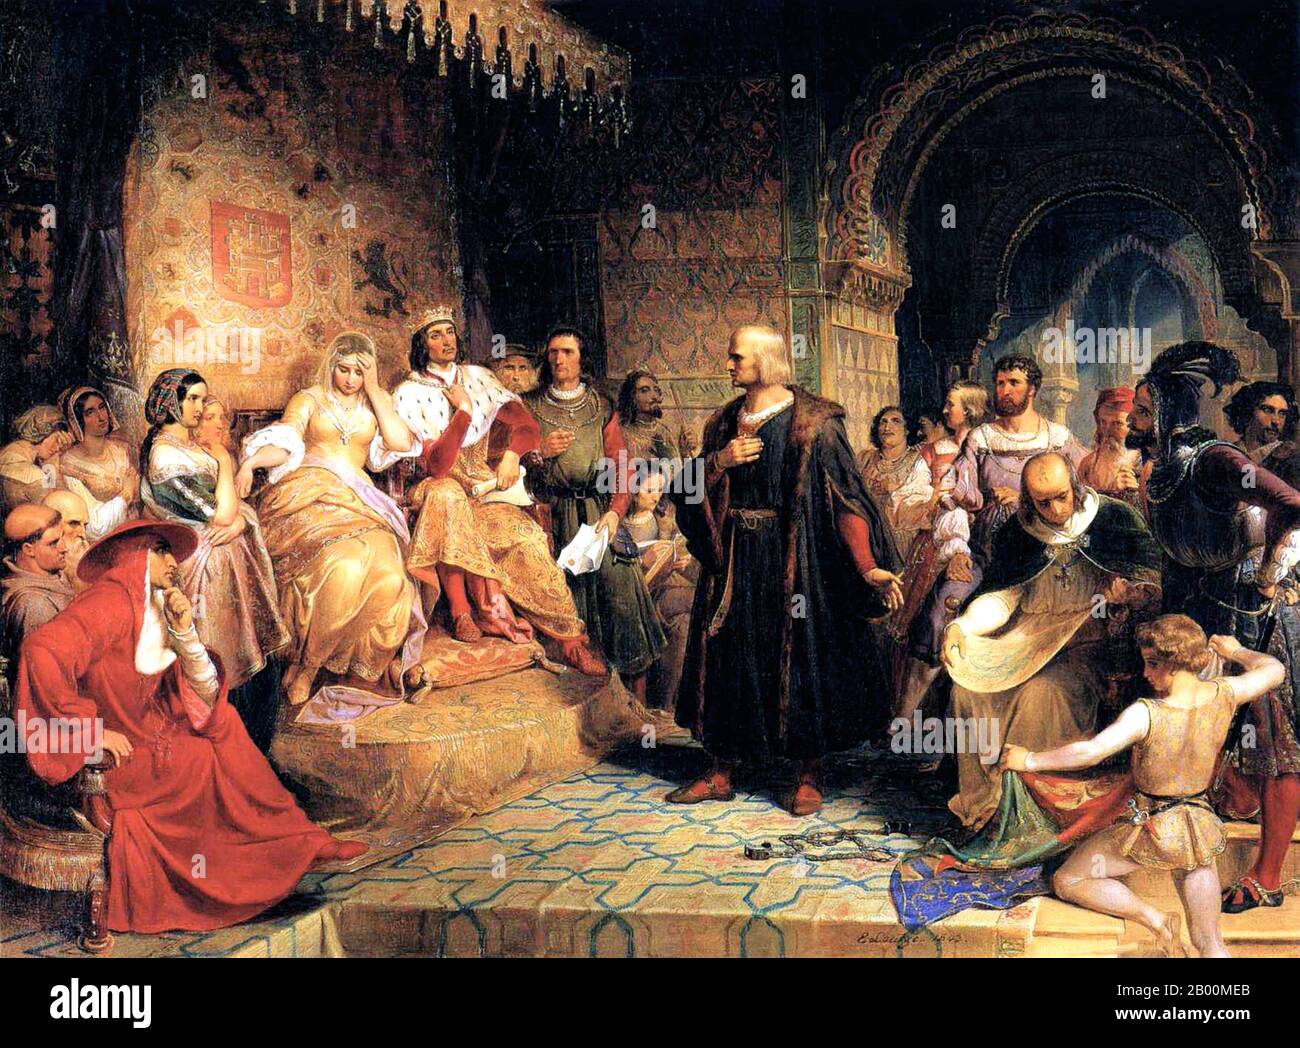 Italy: 'Christopher Columbus (1451-1506) in audience with Queen Isabella of Spain'. Oil on canvas painting by Emanuel Leutze (1816-1868), 1843.  Christopher Columbus (c. 31 October 1451-20 May 1506) was a navigator, colonizer, and explorer from Genoa, Italy, whose voyages across the Atlantic Ocean led to general European awareness of the American continents in the Western Hemisphere. Isabella I (22 April 1451-26 November 1504) was Queen of Castile and Spain. Stock Photo